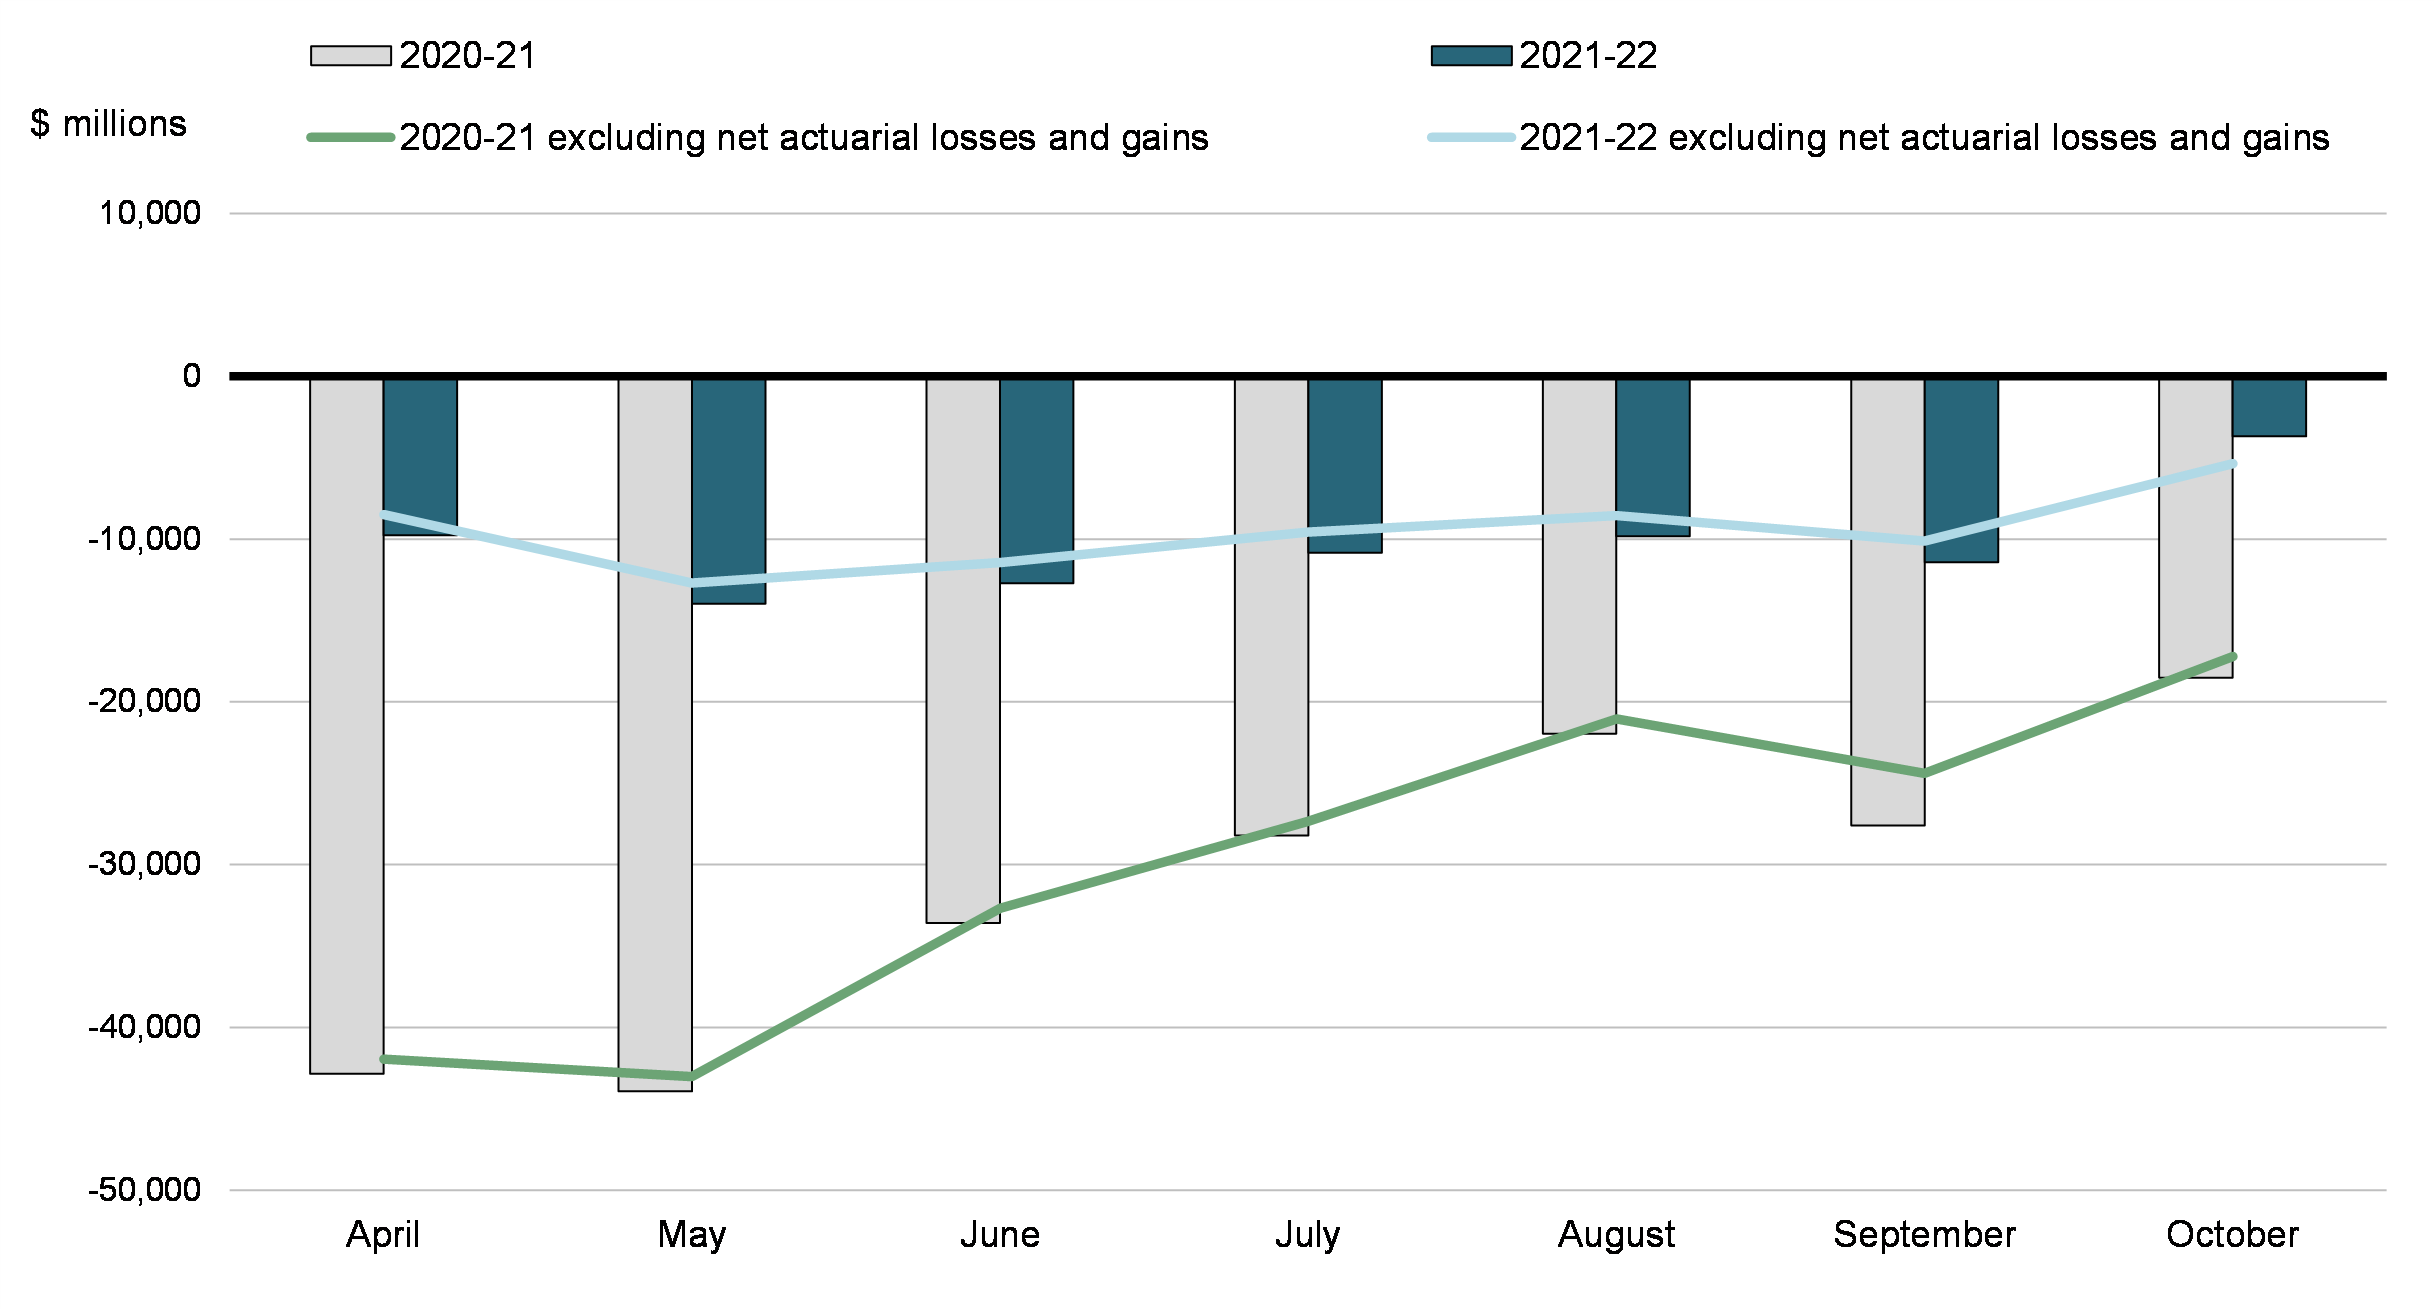 Chart 1: Monthly Budgetary Balance and Budgetary Balance Excluding Net Actuarial Losses